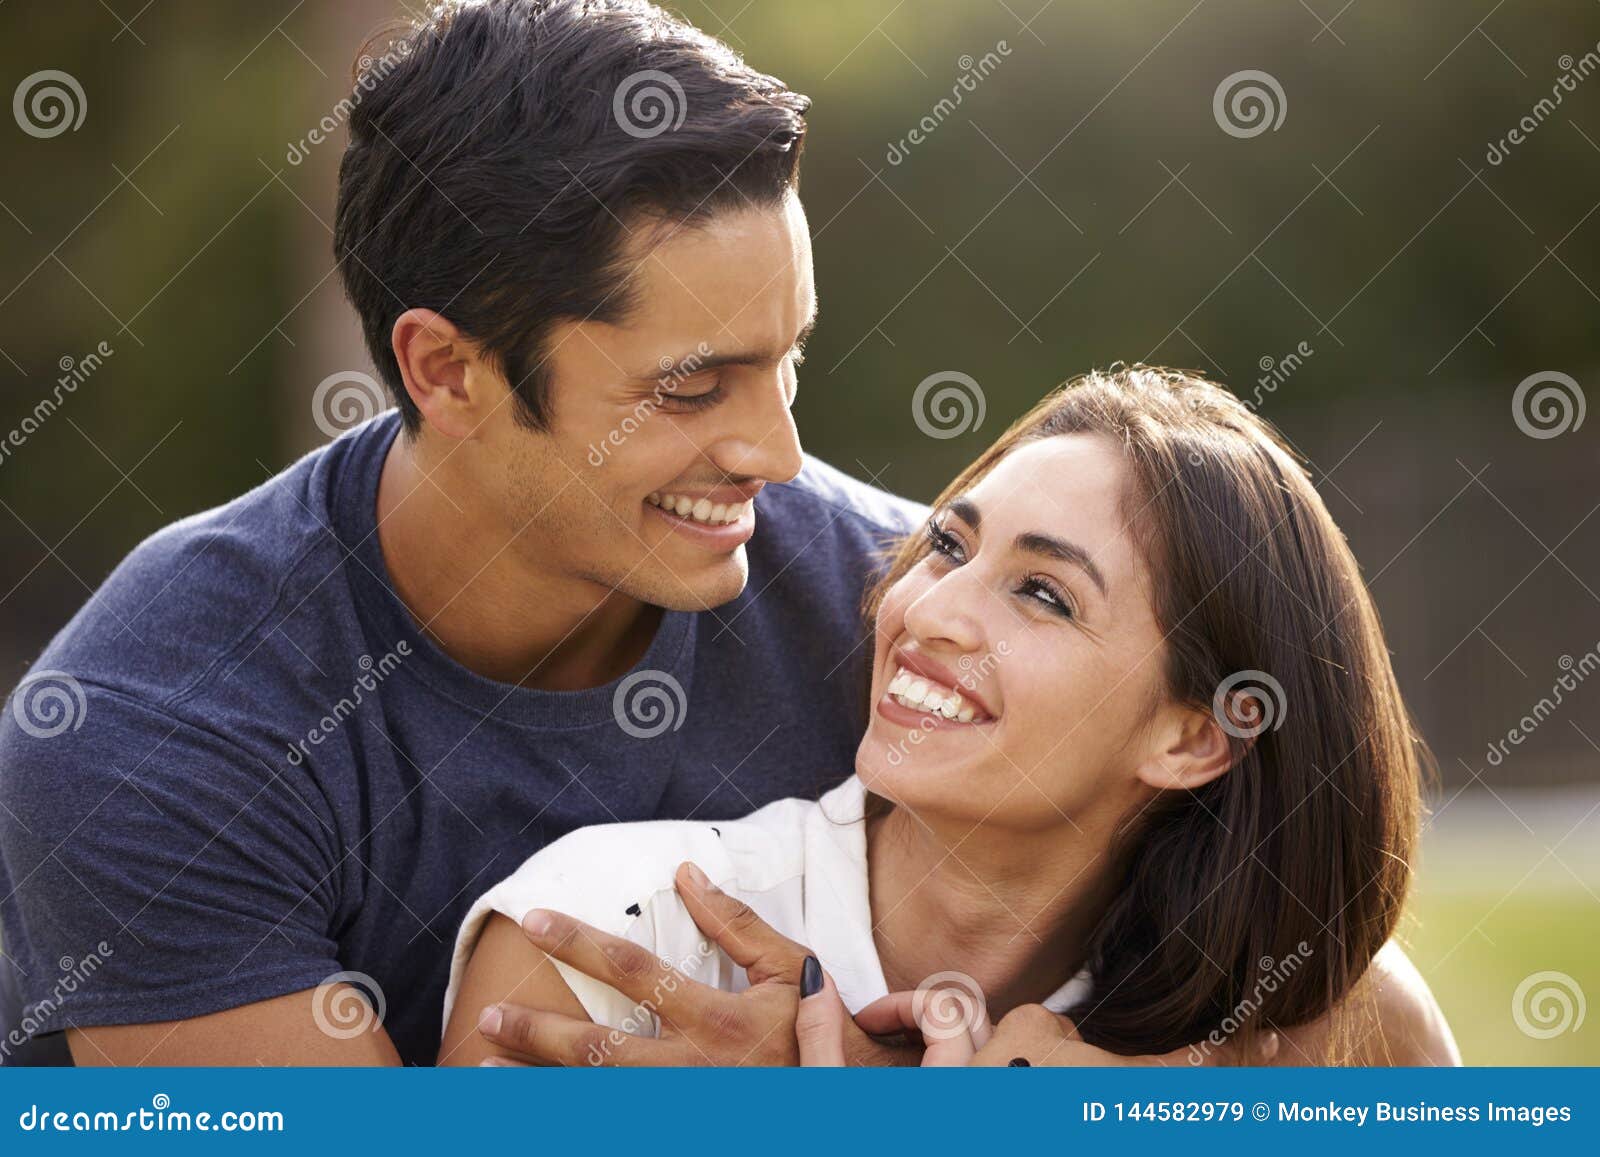 Young Hispanic Couple Looking At Each Other Smiling Close Up Stock